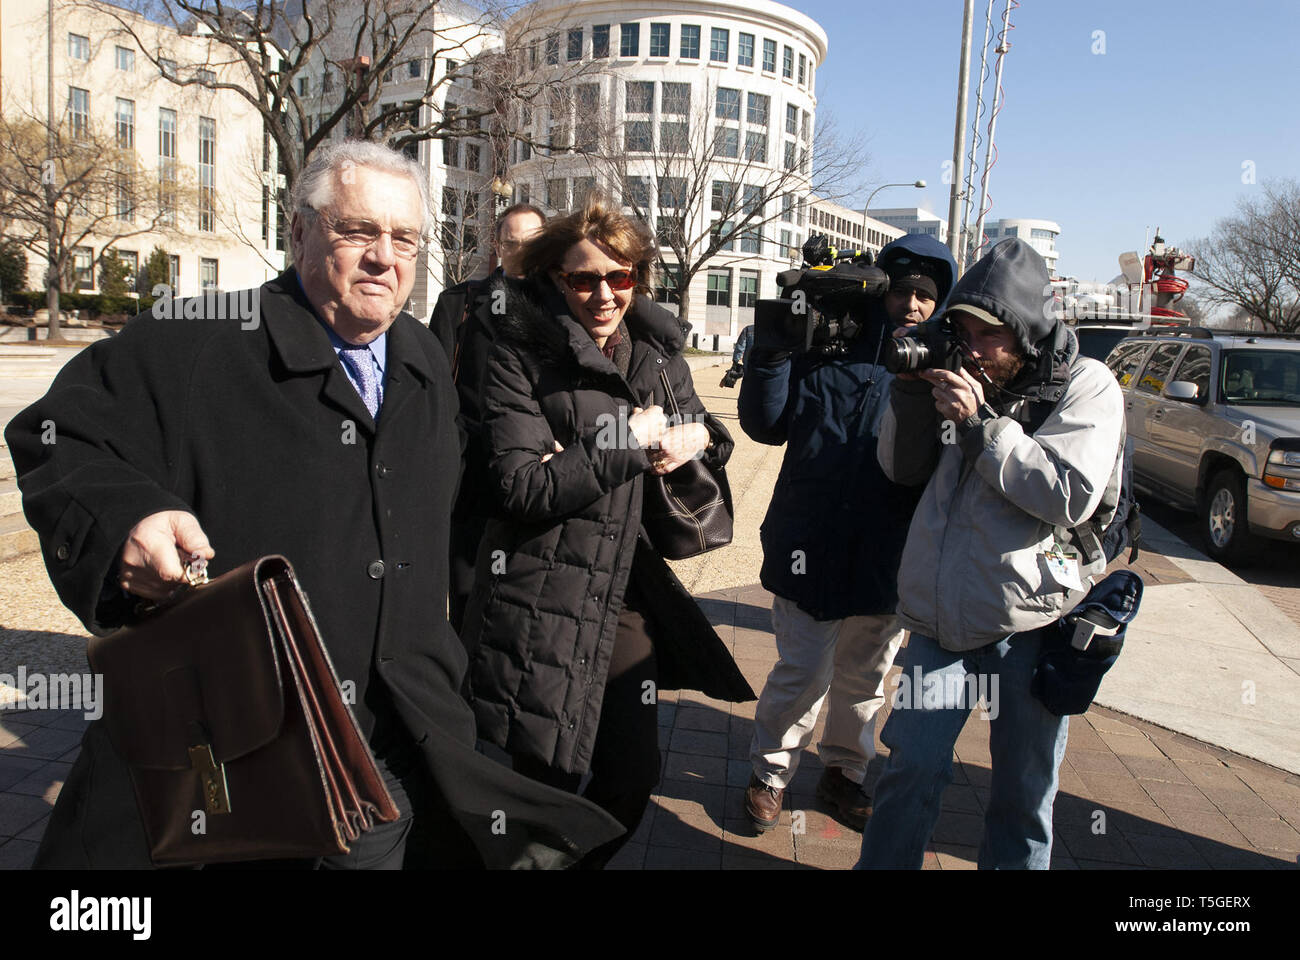 Washington, DC, USA. 31st Jan, 2007. Reporter Judith Miller, left, and her lawyer, Robert Bennett, leave the U.S. District Court House in Washington, DC, Jan. 31, 2007, after Miller finished testifying for the prosecution in the I. Lewis ''Scooter'' Libby perjury trial. This is the second week of the trial, which is expected to last 4-6 weeks. Credit: Bill Putnam/ZUMA Wire/Alamy Live News Stock Photo